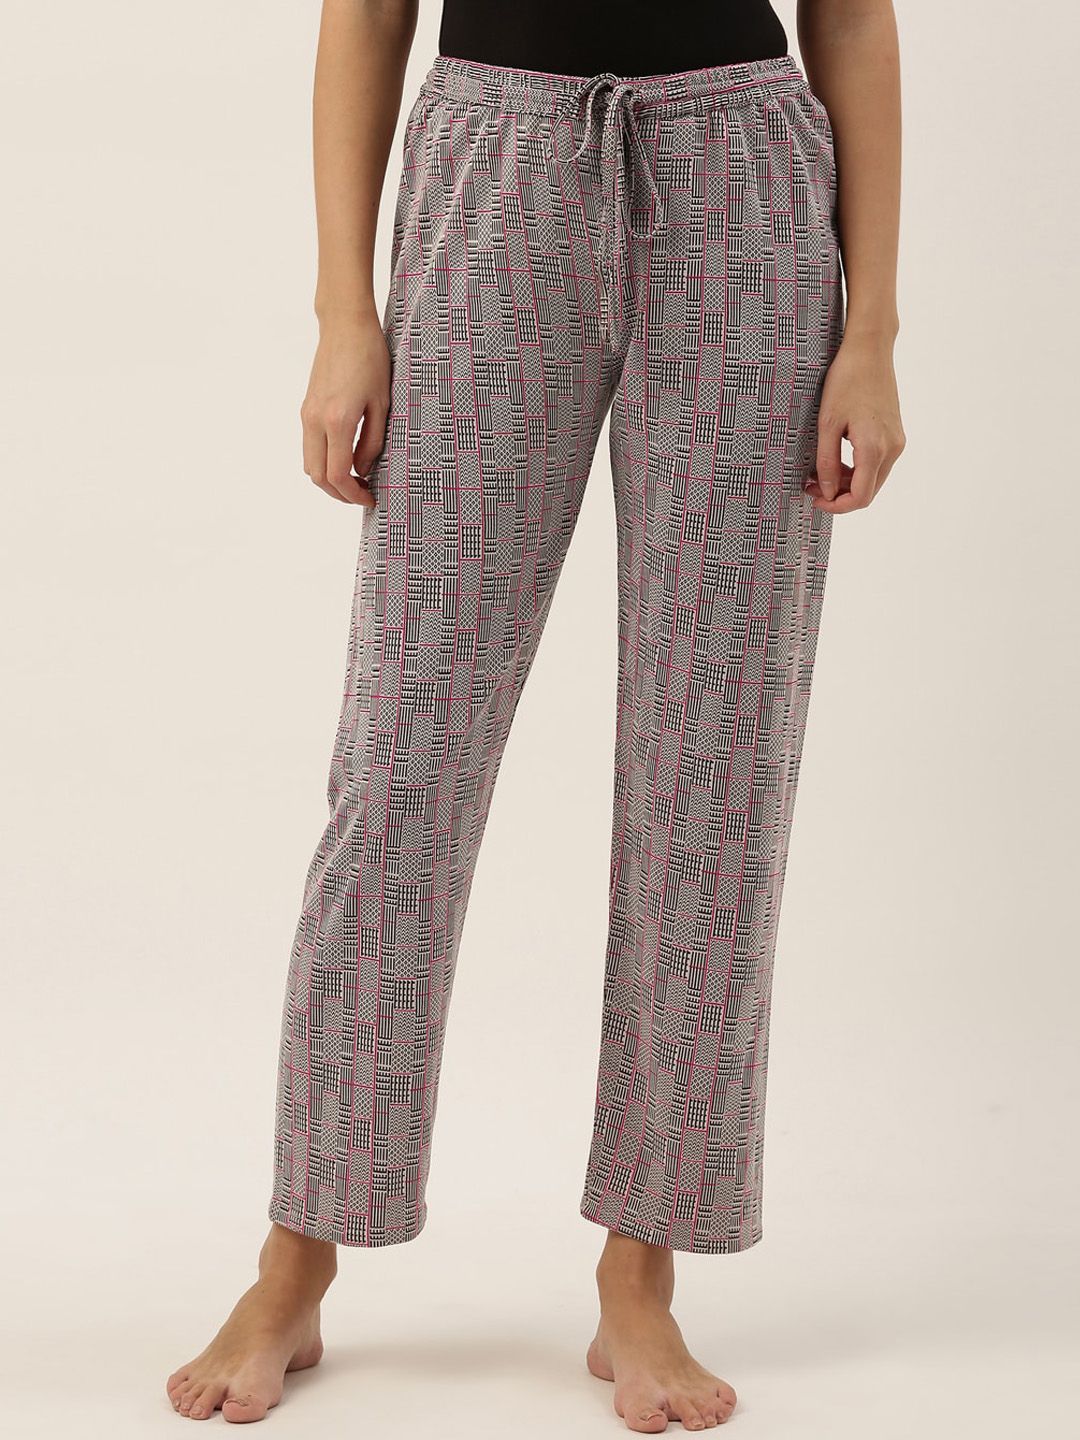 Bannos Swagger Women Grey Printed Lounge Pants Price in India